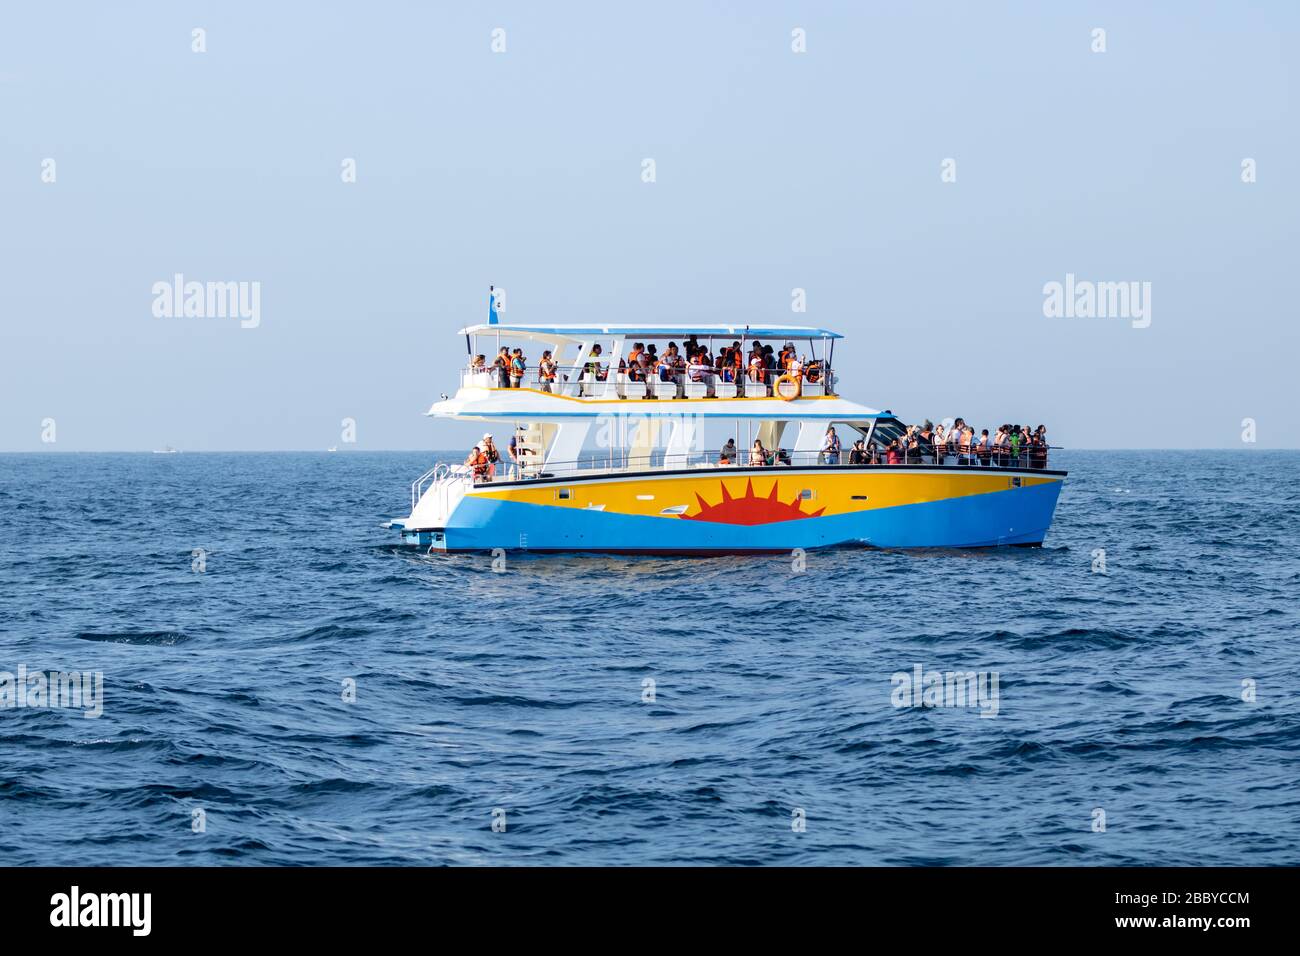 Whale and Dolphin watching on Ship in deep blue ocean as entertainment and tourism activity Stock Photo